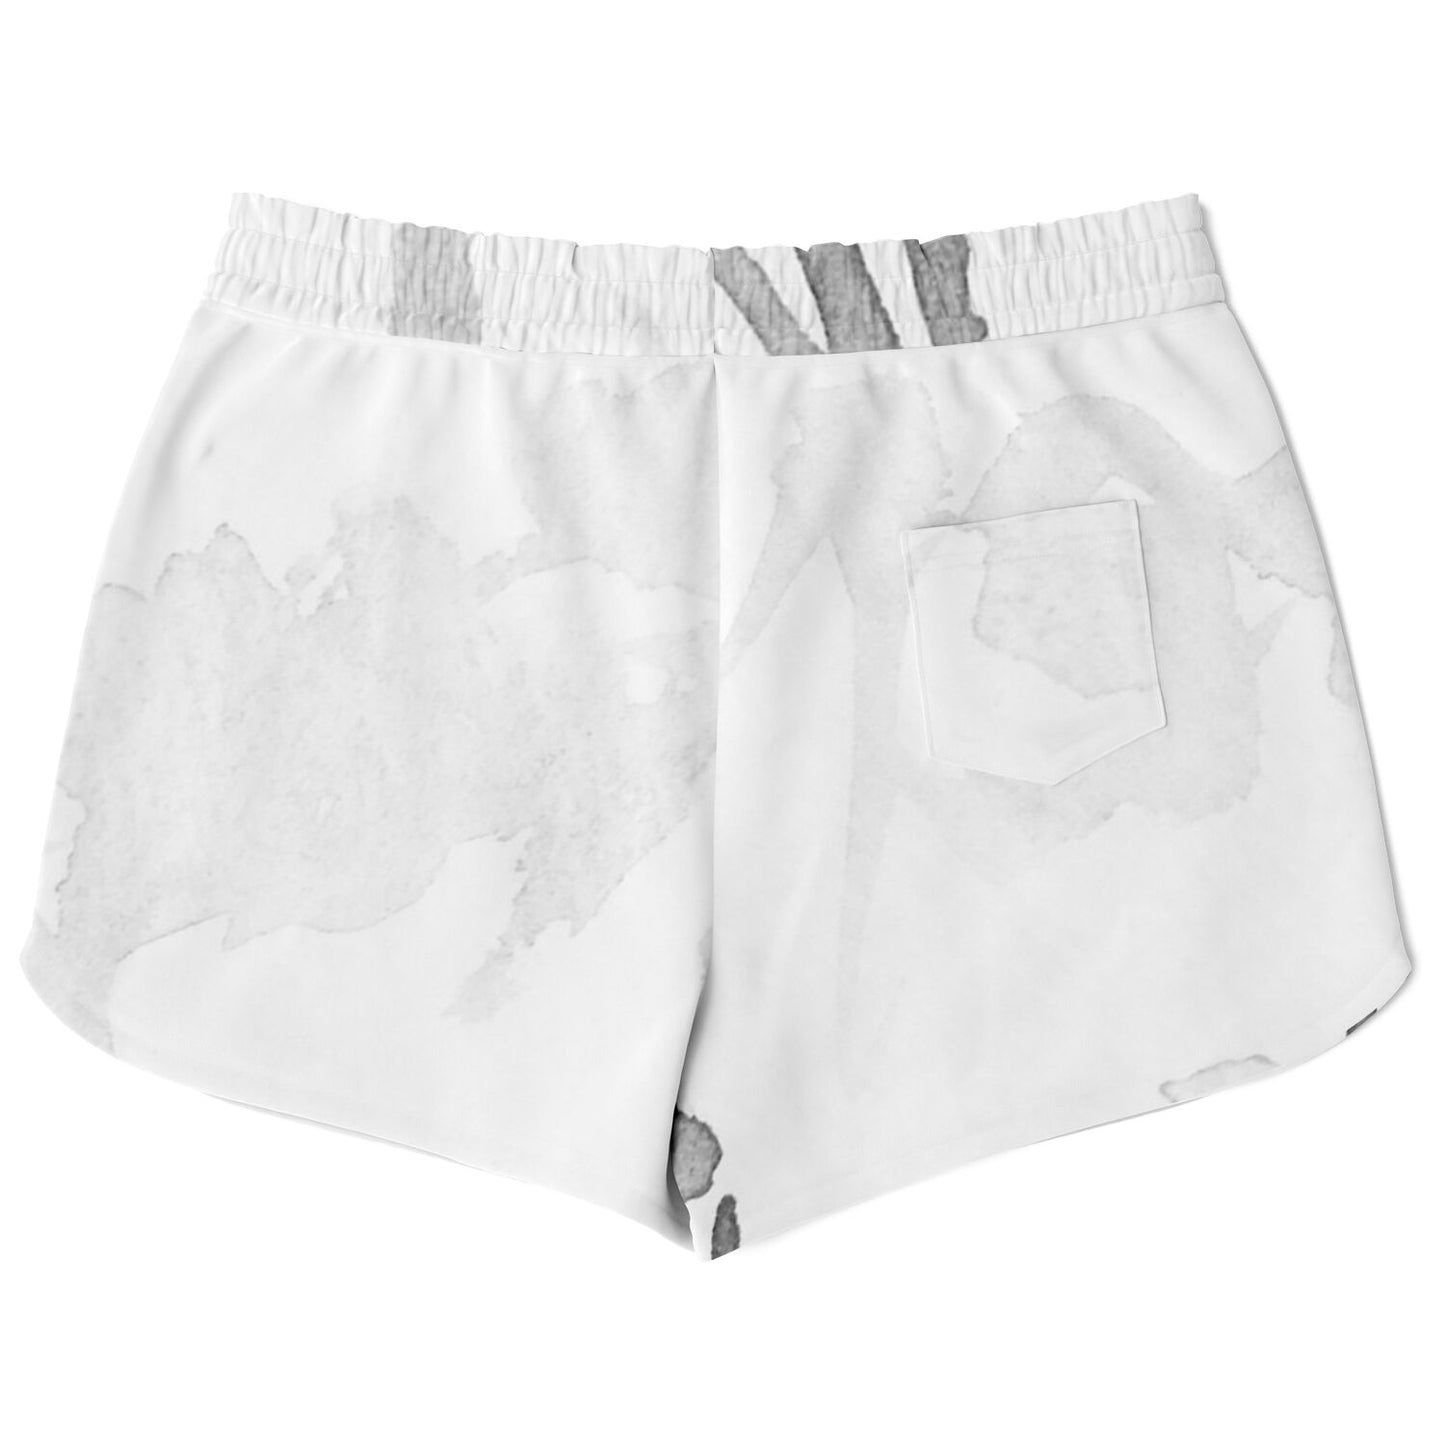 Women's All Over Print Fashion Shorts